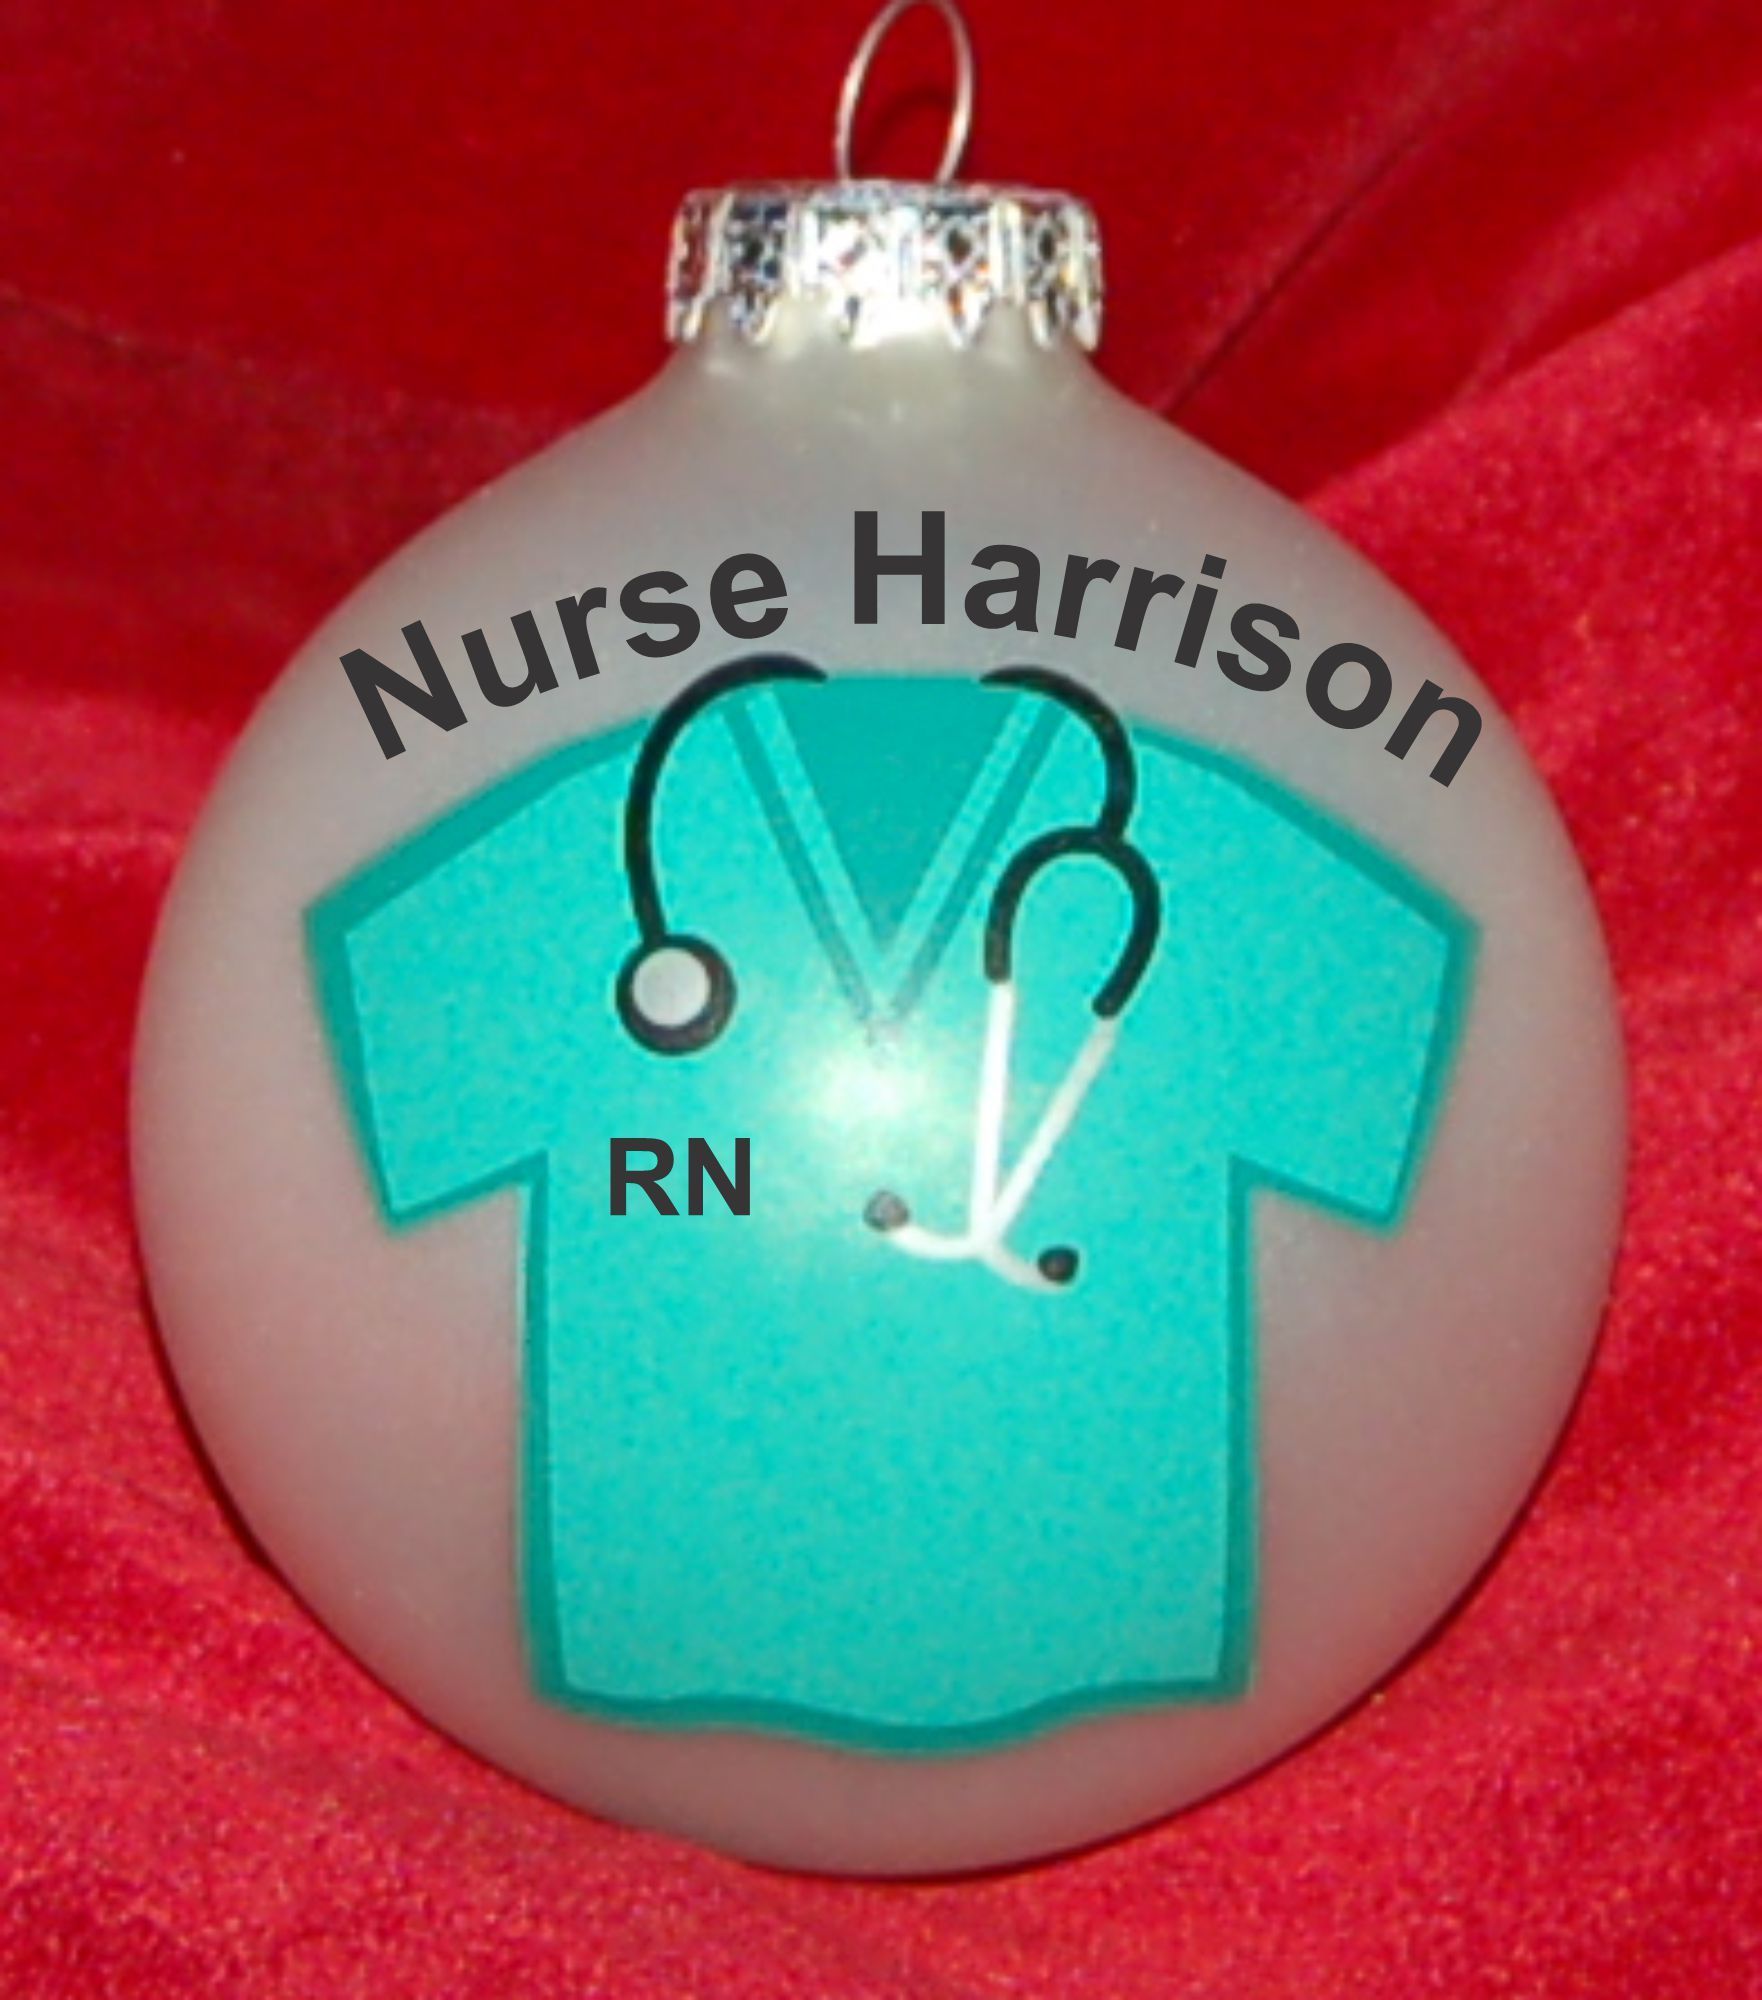 Scrubs for New Nurse Christmas Ornament Personalized by RussellRhodes.com